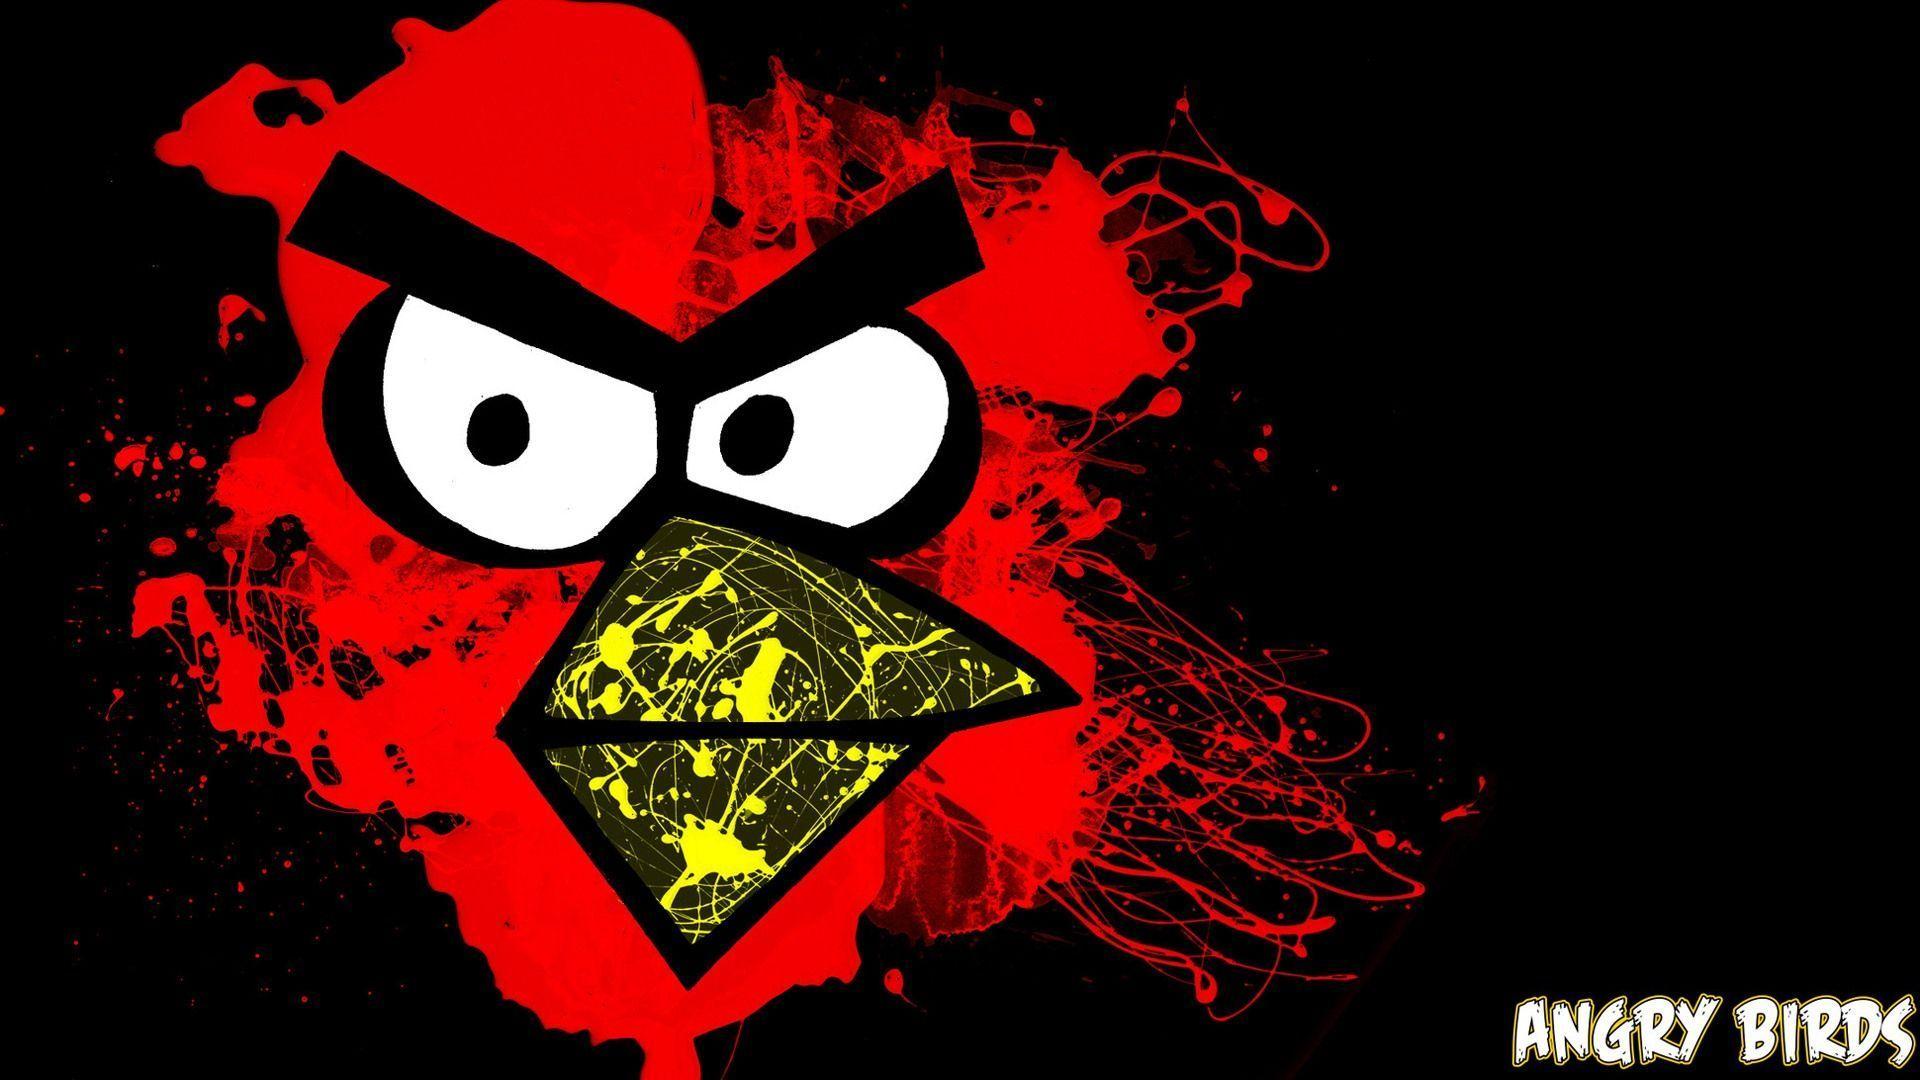 Best HD Angry Birds Wallpaper, 1920x1080 for mobile and desktop